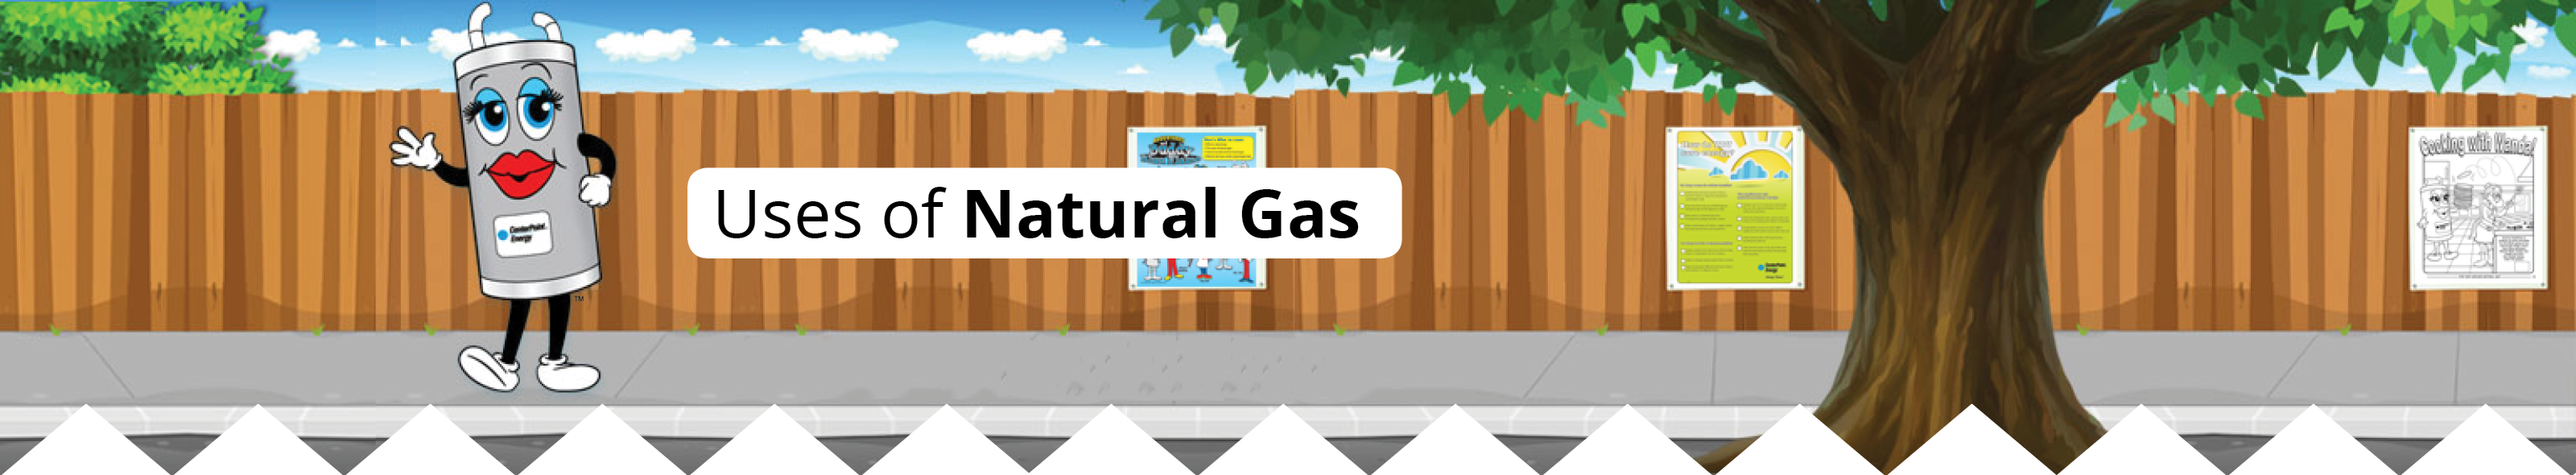 Uses of Natural Gas